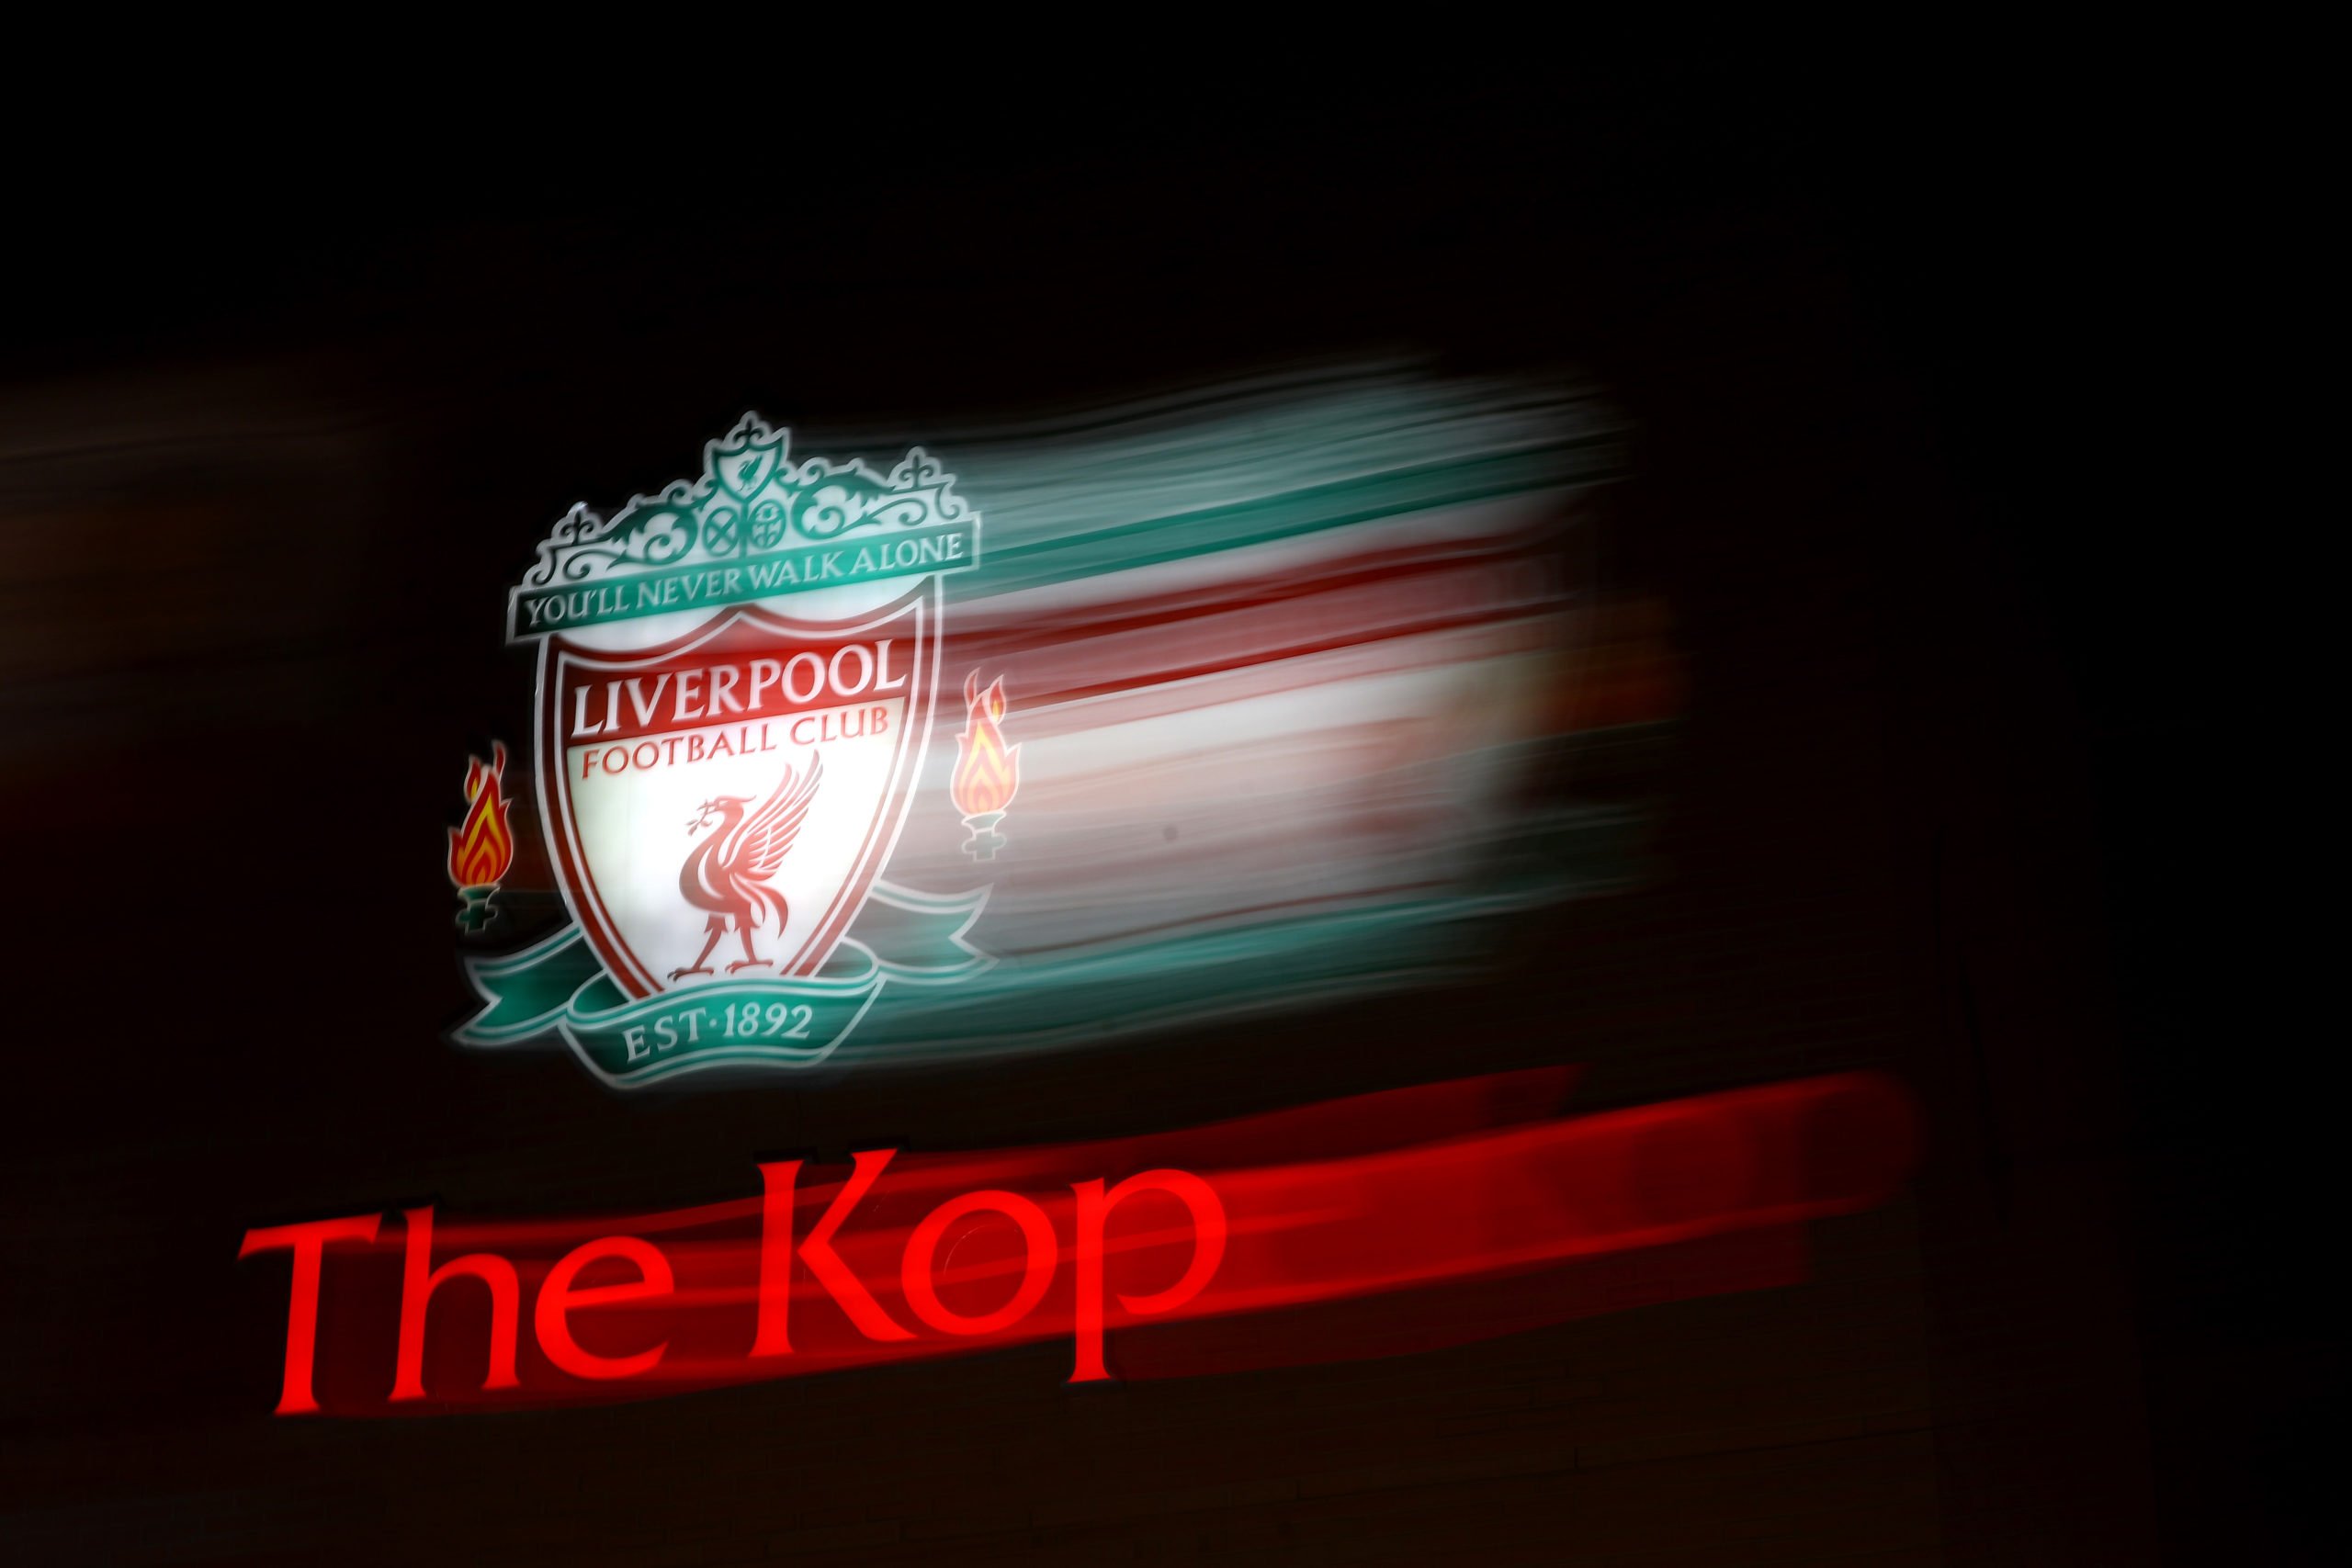 Report: West Ham prepared to sell player to Liverpool but only for a profit of £53 million